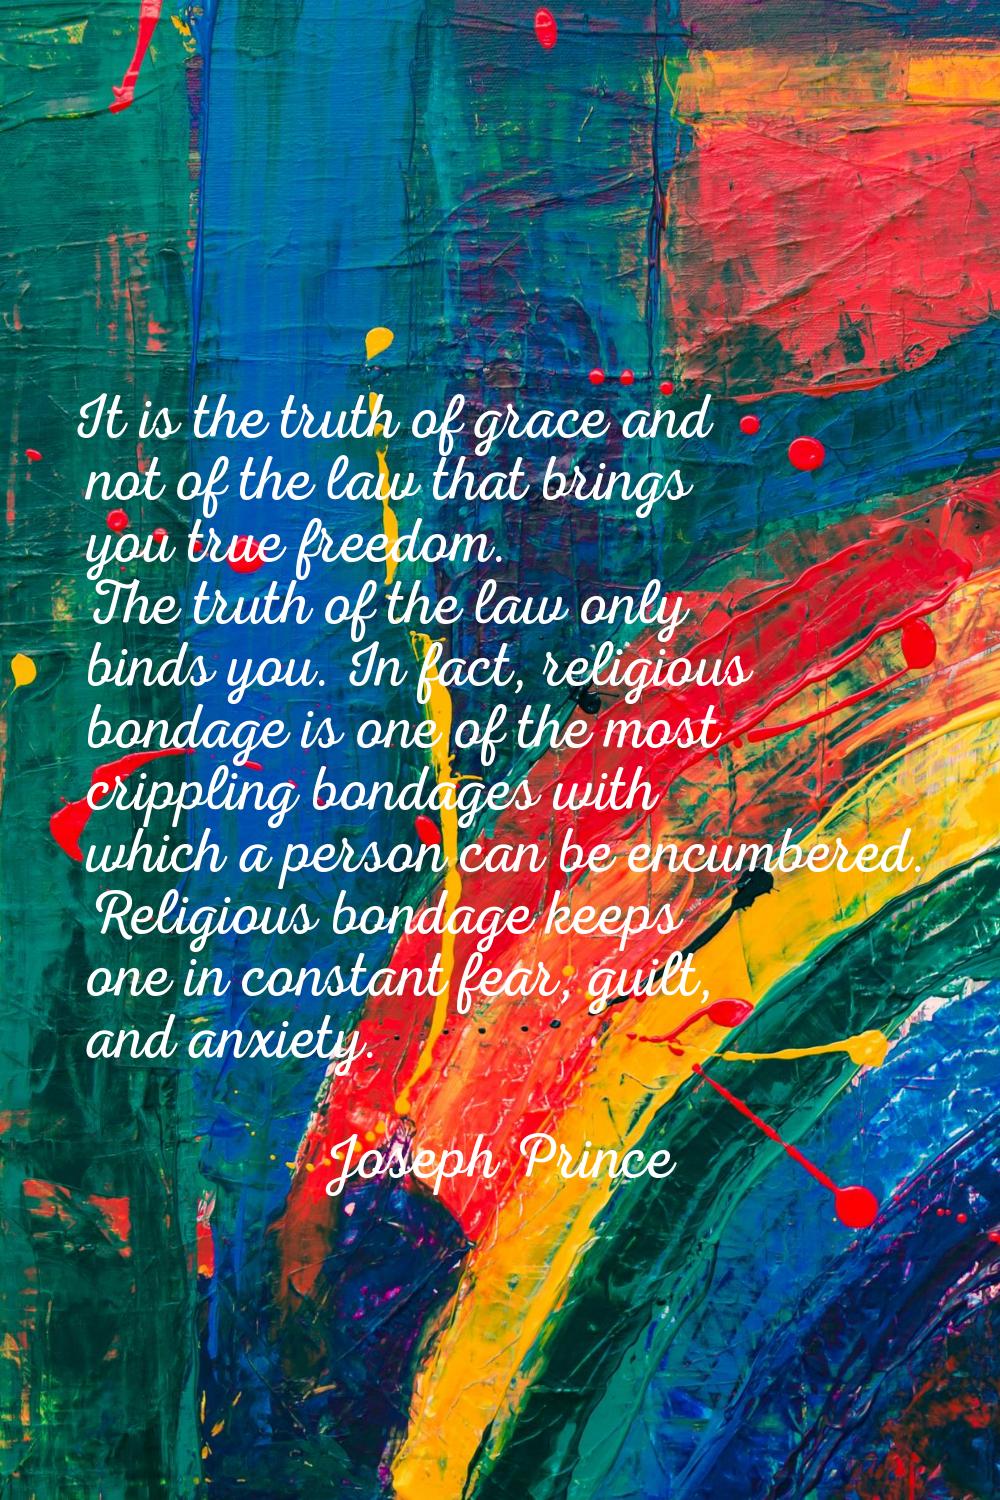 It is the truth of grace and not of the law that brings you true freedom. The truth of the law only